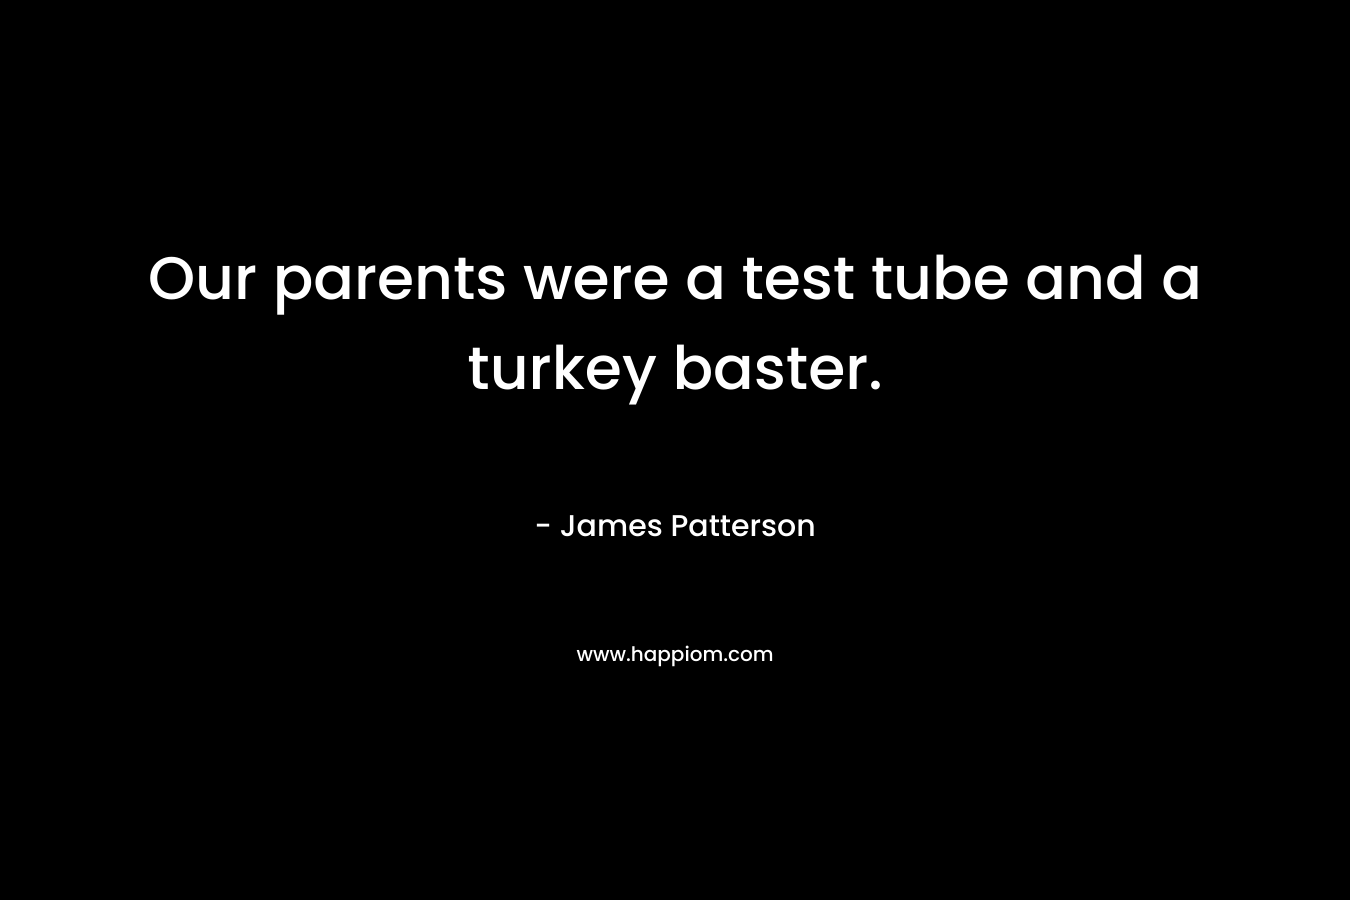 Our parents were a test tube and a turkey baster. – James Patterson